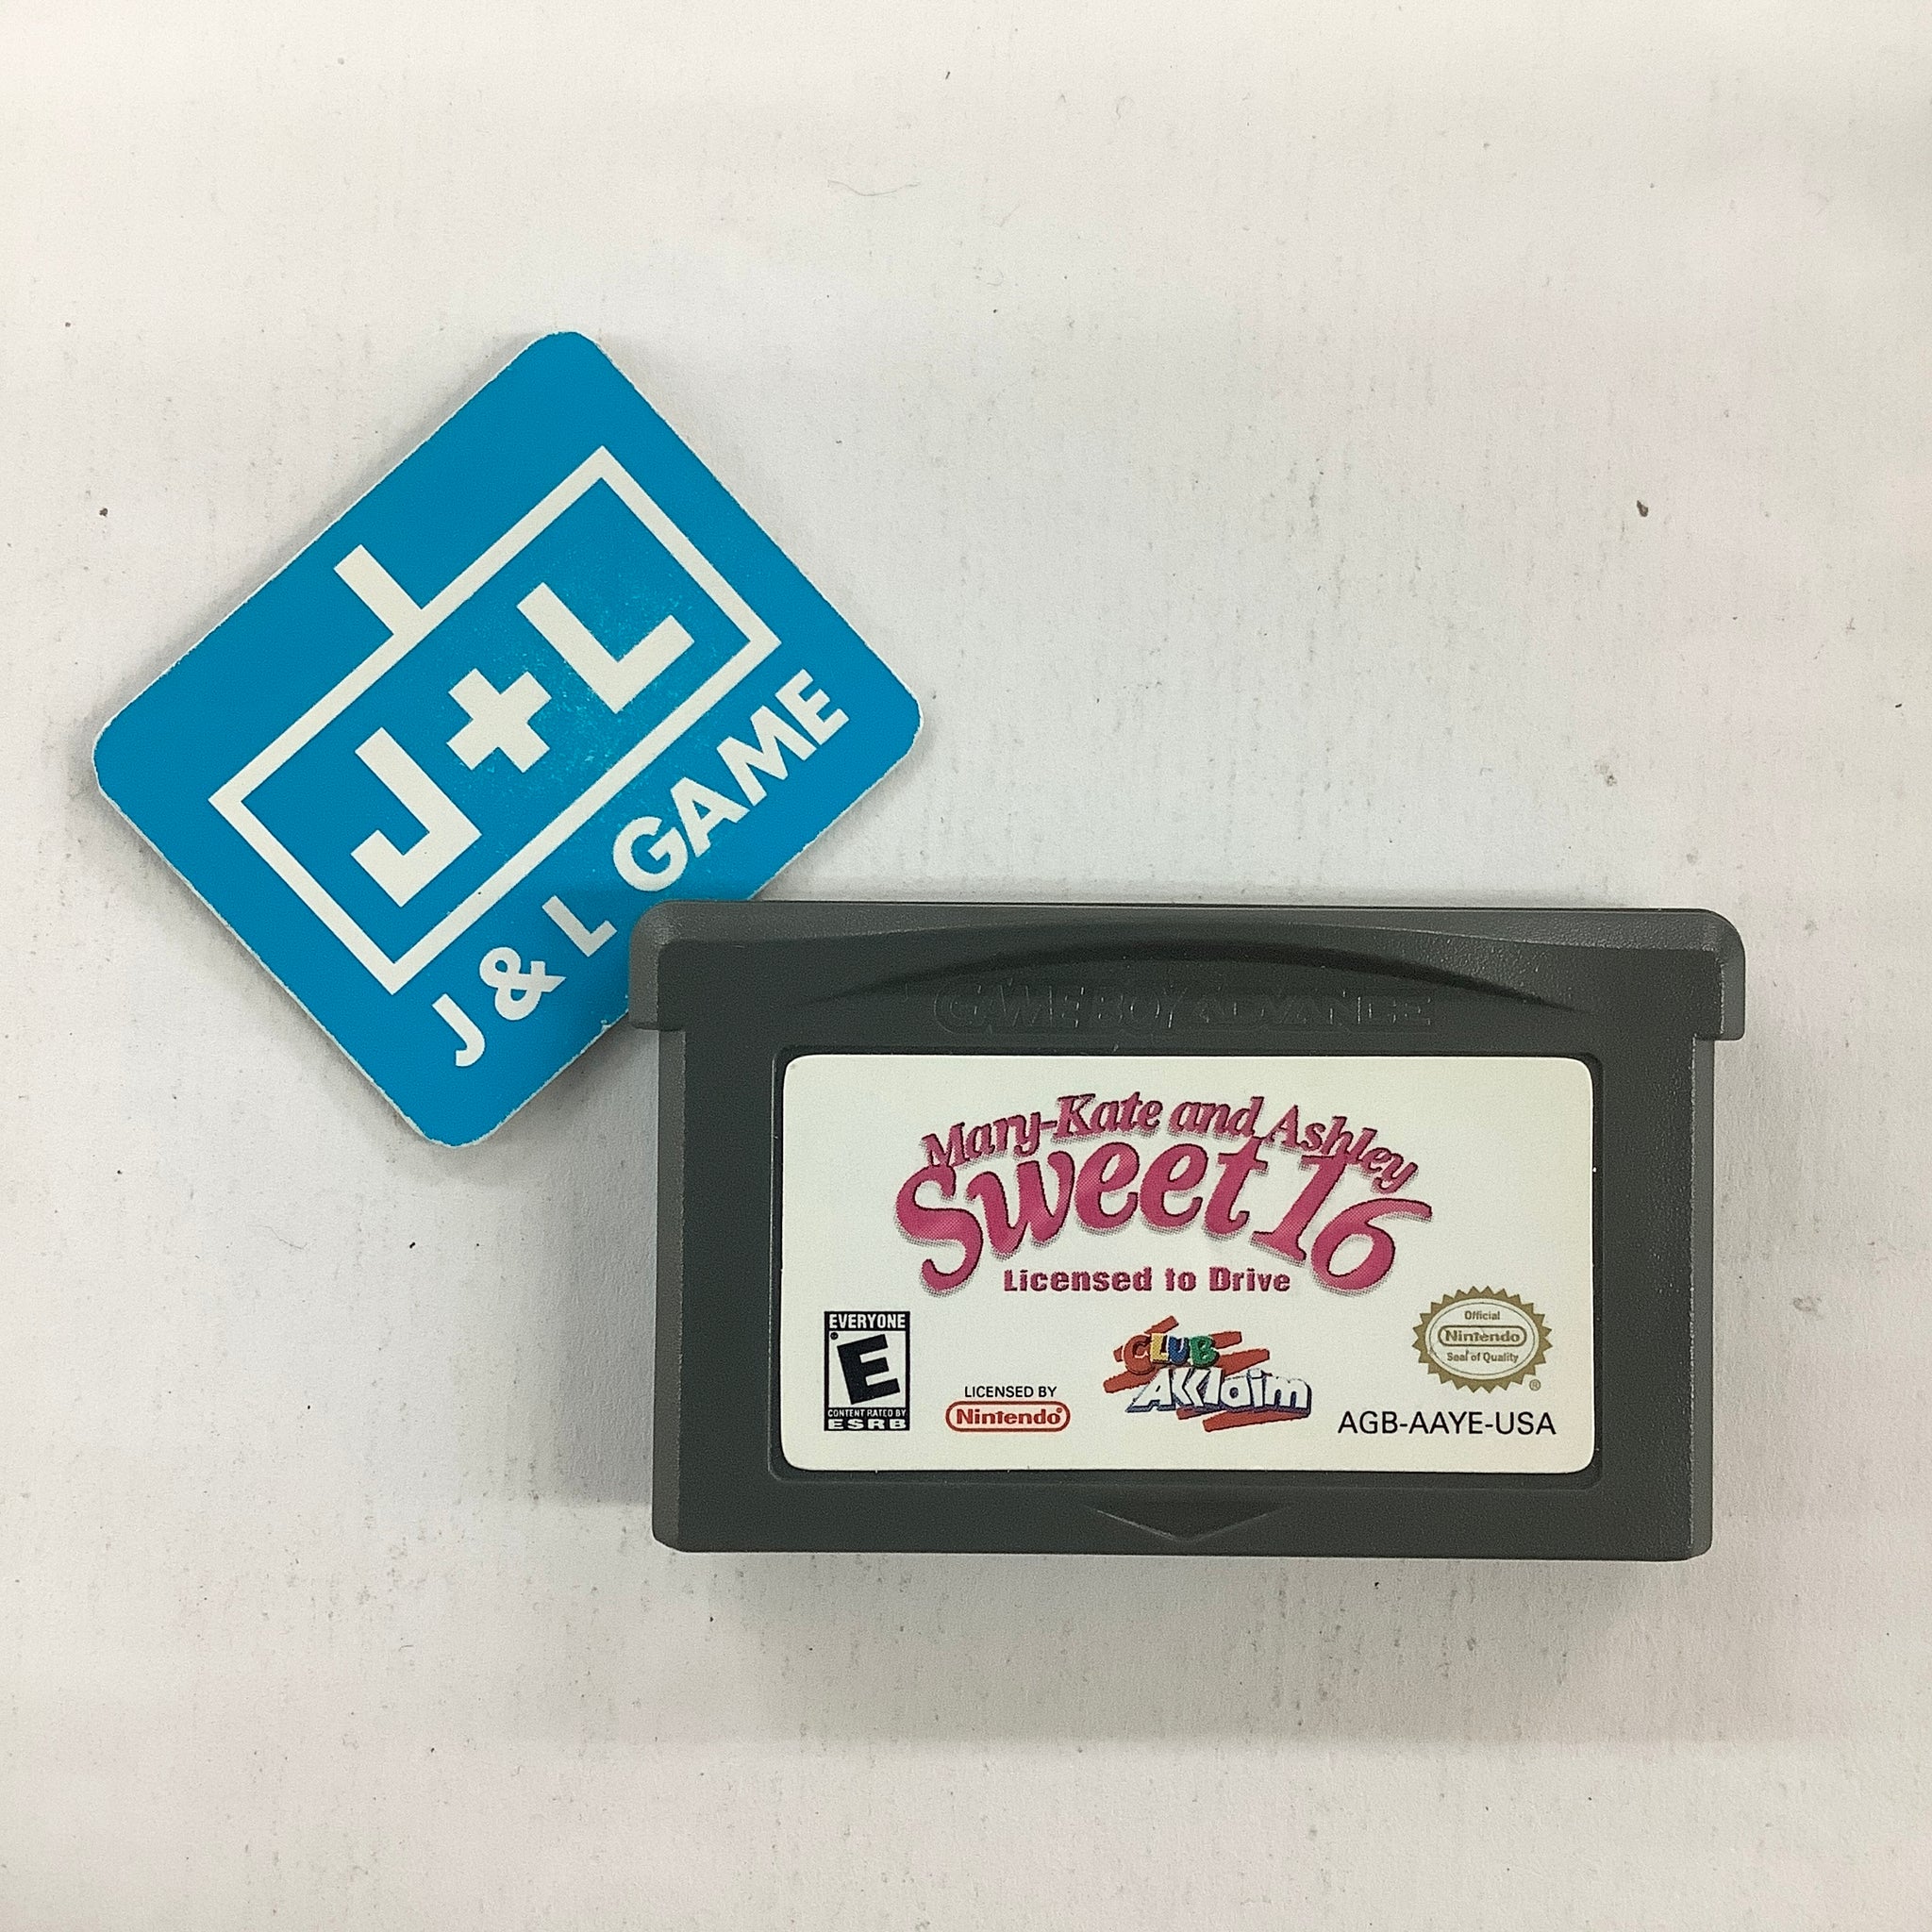 Mary-Kate and Ashley: Sweet 16 - Licensed to Drive - (GBA) Game Boy Advance [Pre-Owned] Video Games Acclaim   